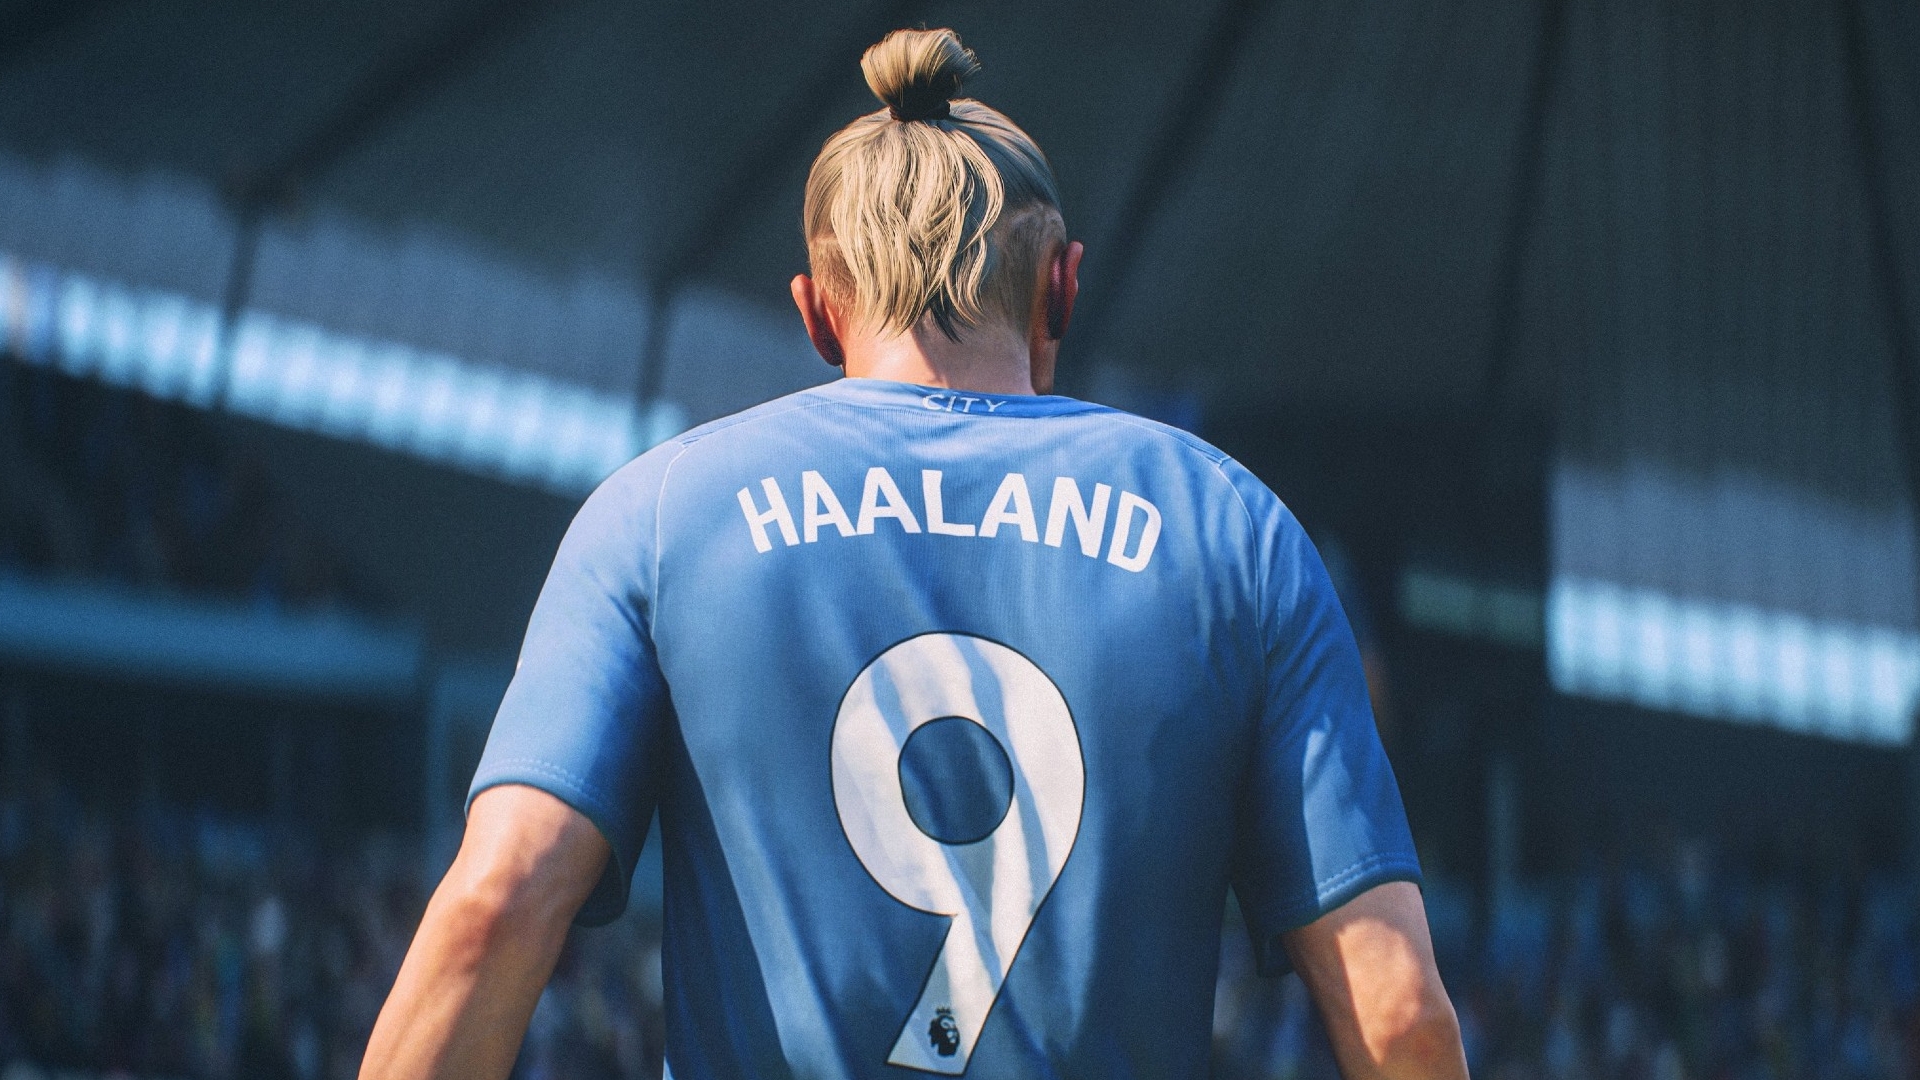 EA Sports FC 24 sees 11.3 million players in its first week